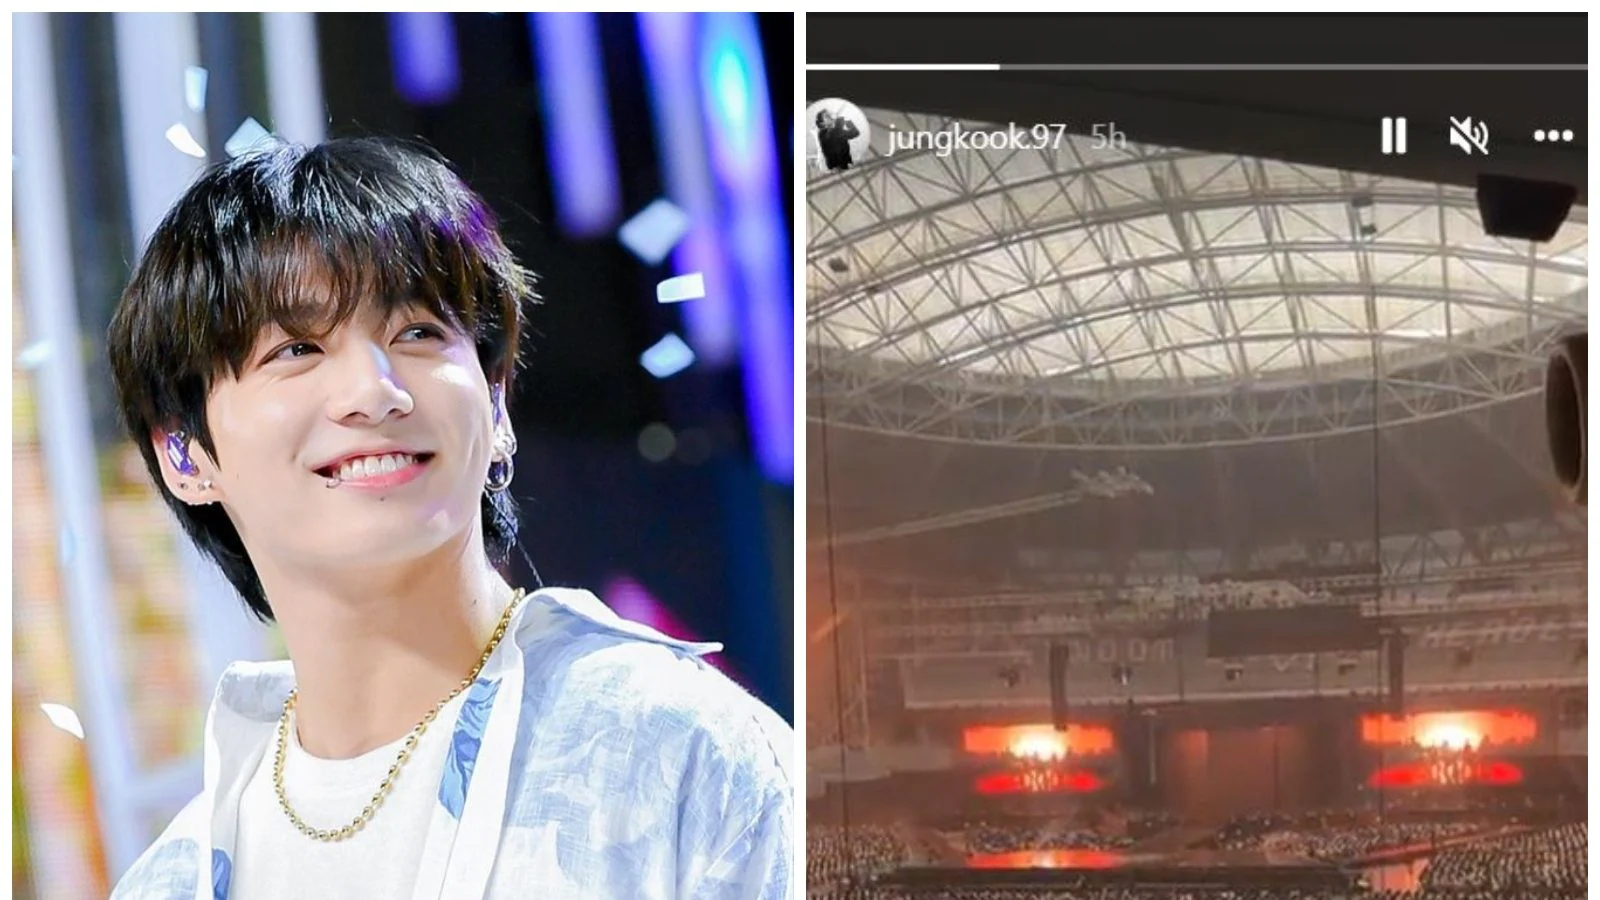 Jungkook Attends Seventeen’s Concert in Seoul to Support Friend Mingyu